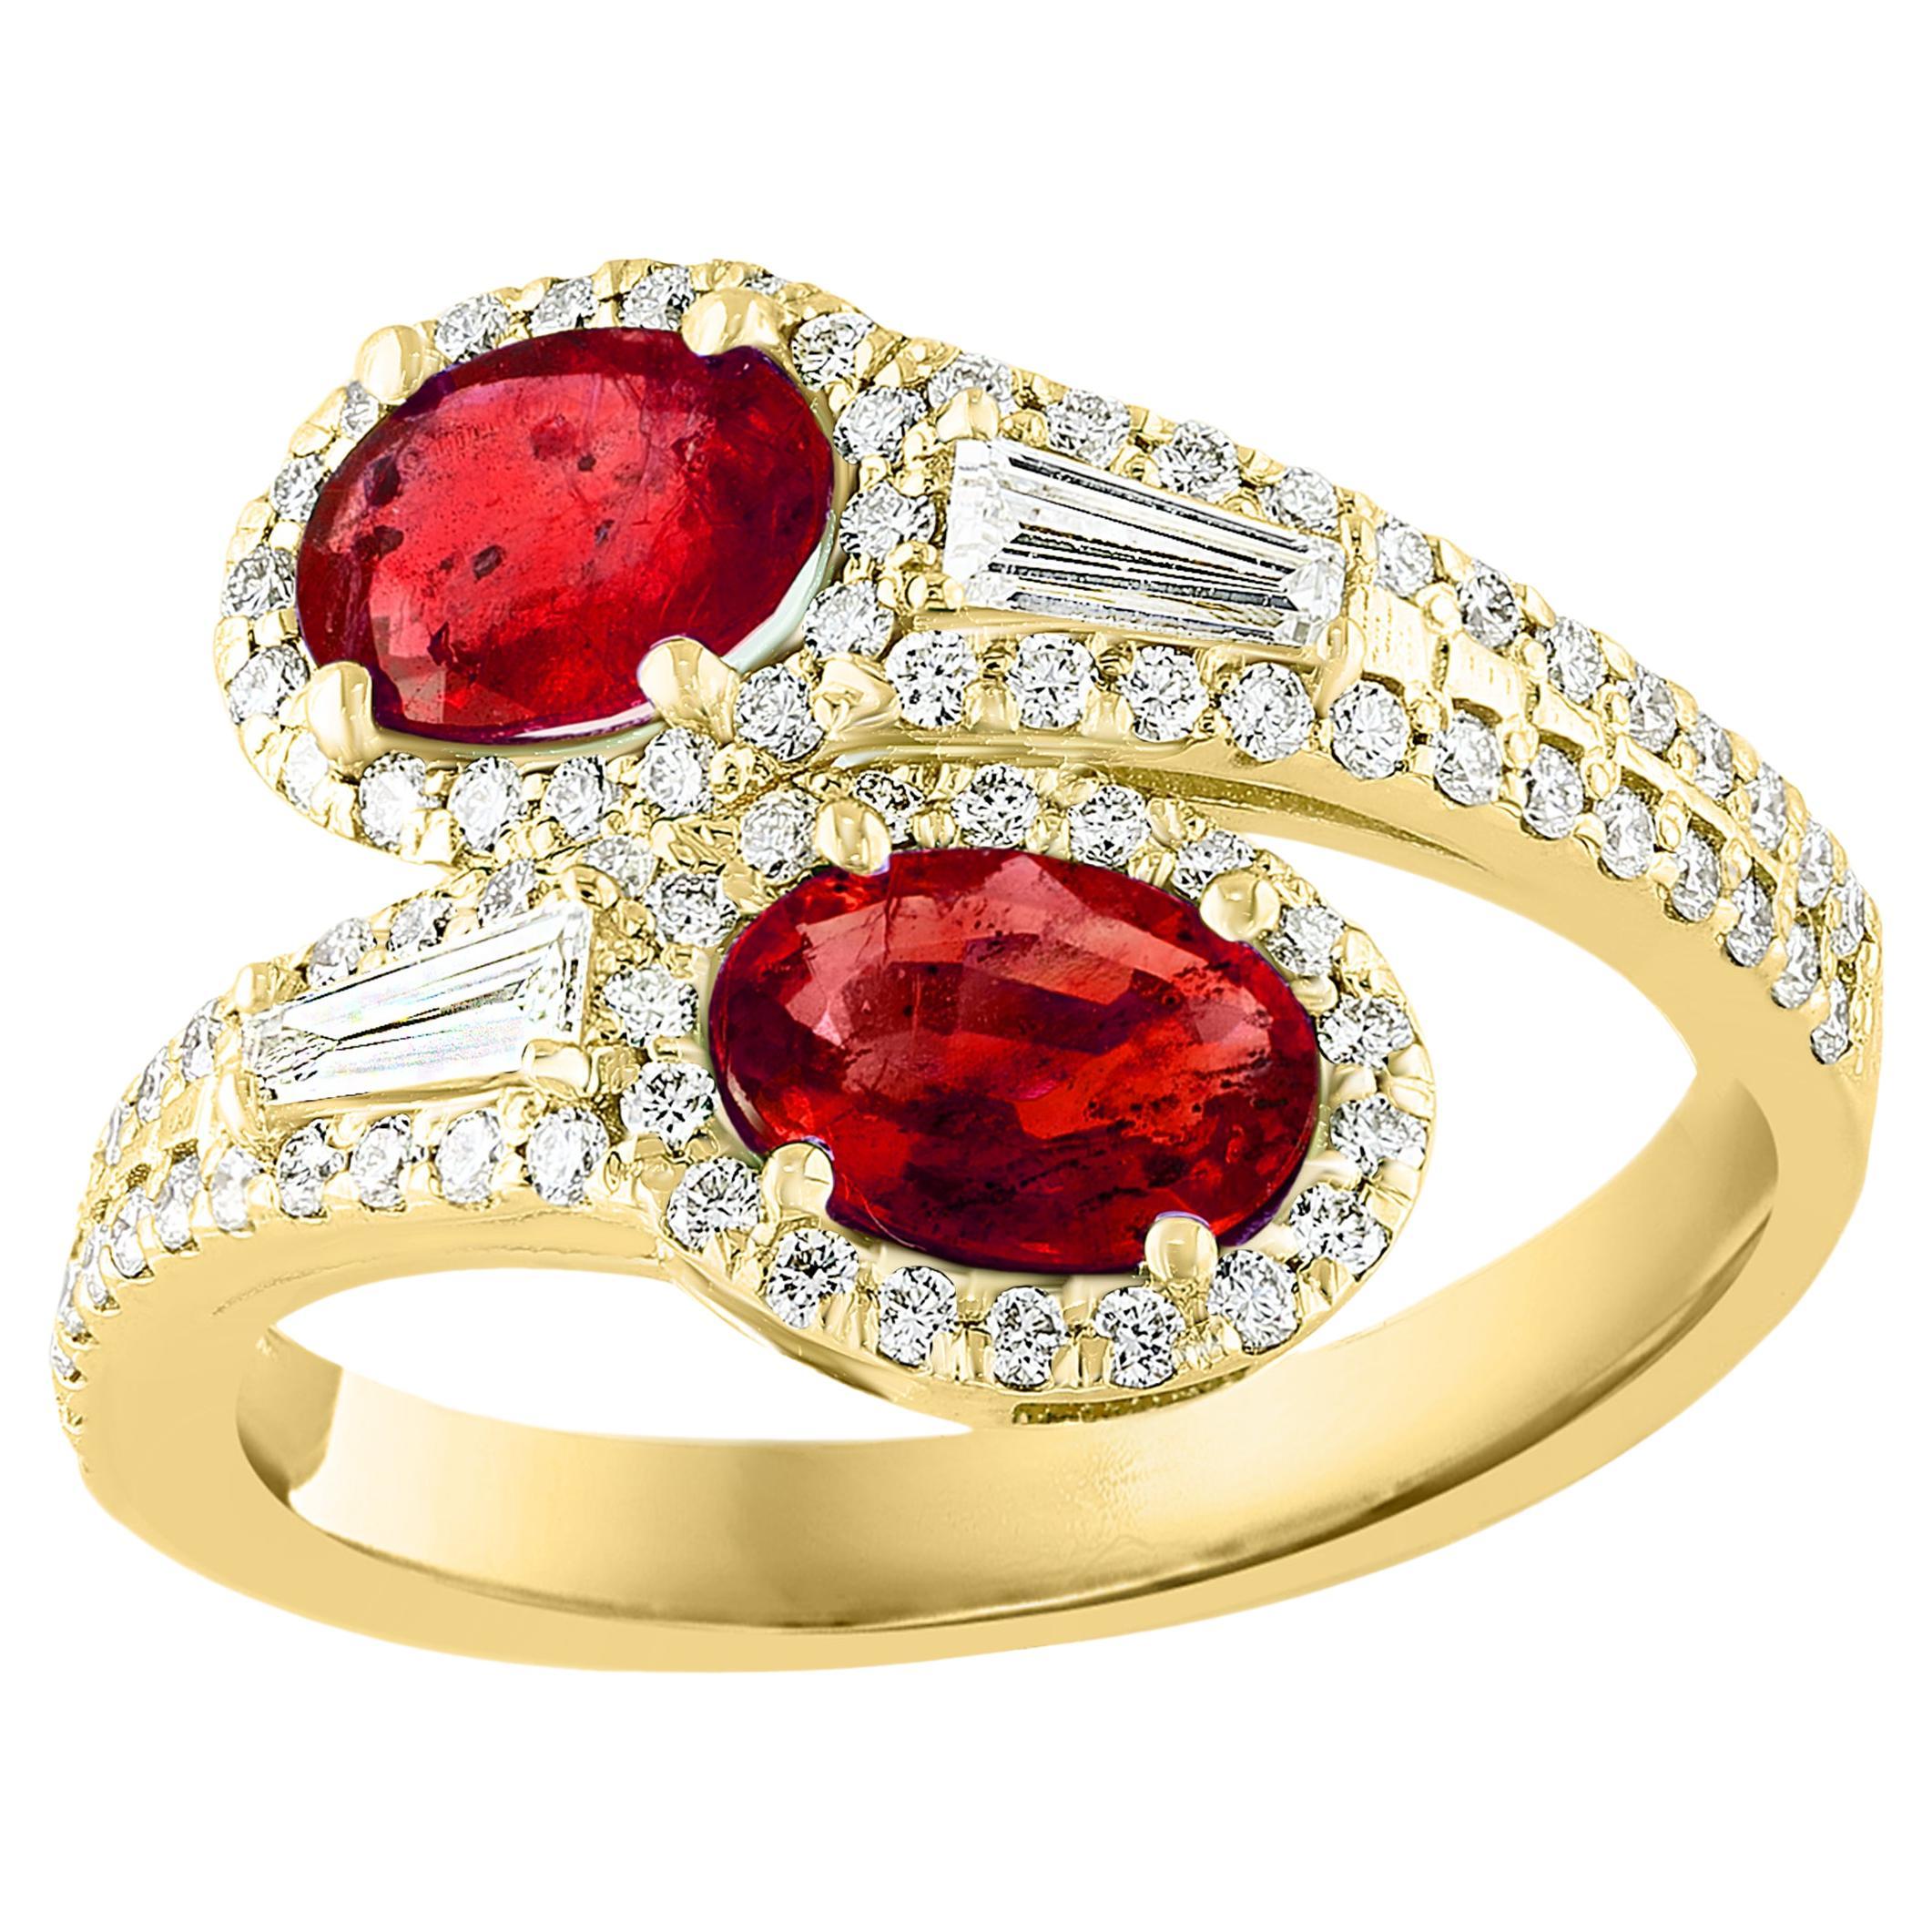 1.67 Carat Oval Cut Ruby Diamond Toi Et Moi Engagement Ring 14K Yellow Gold For Sale